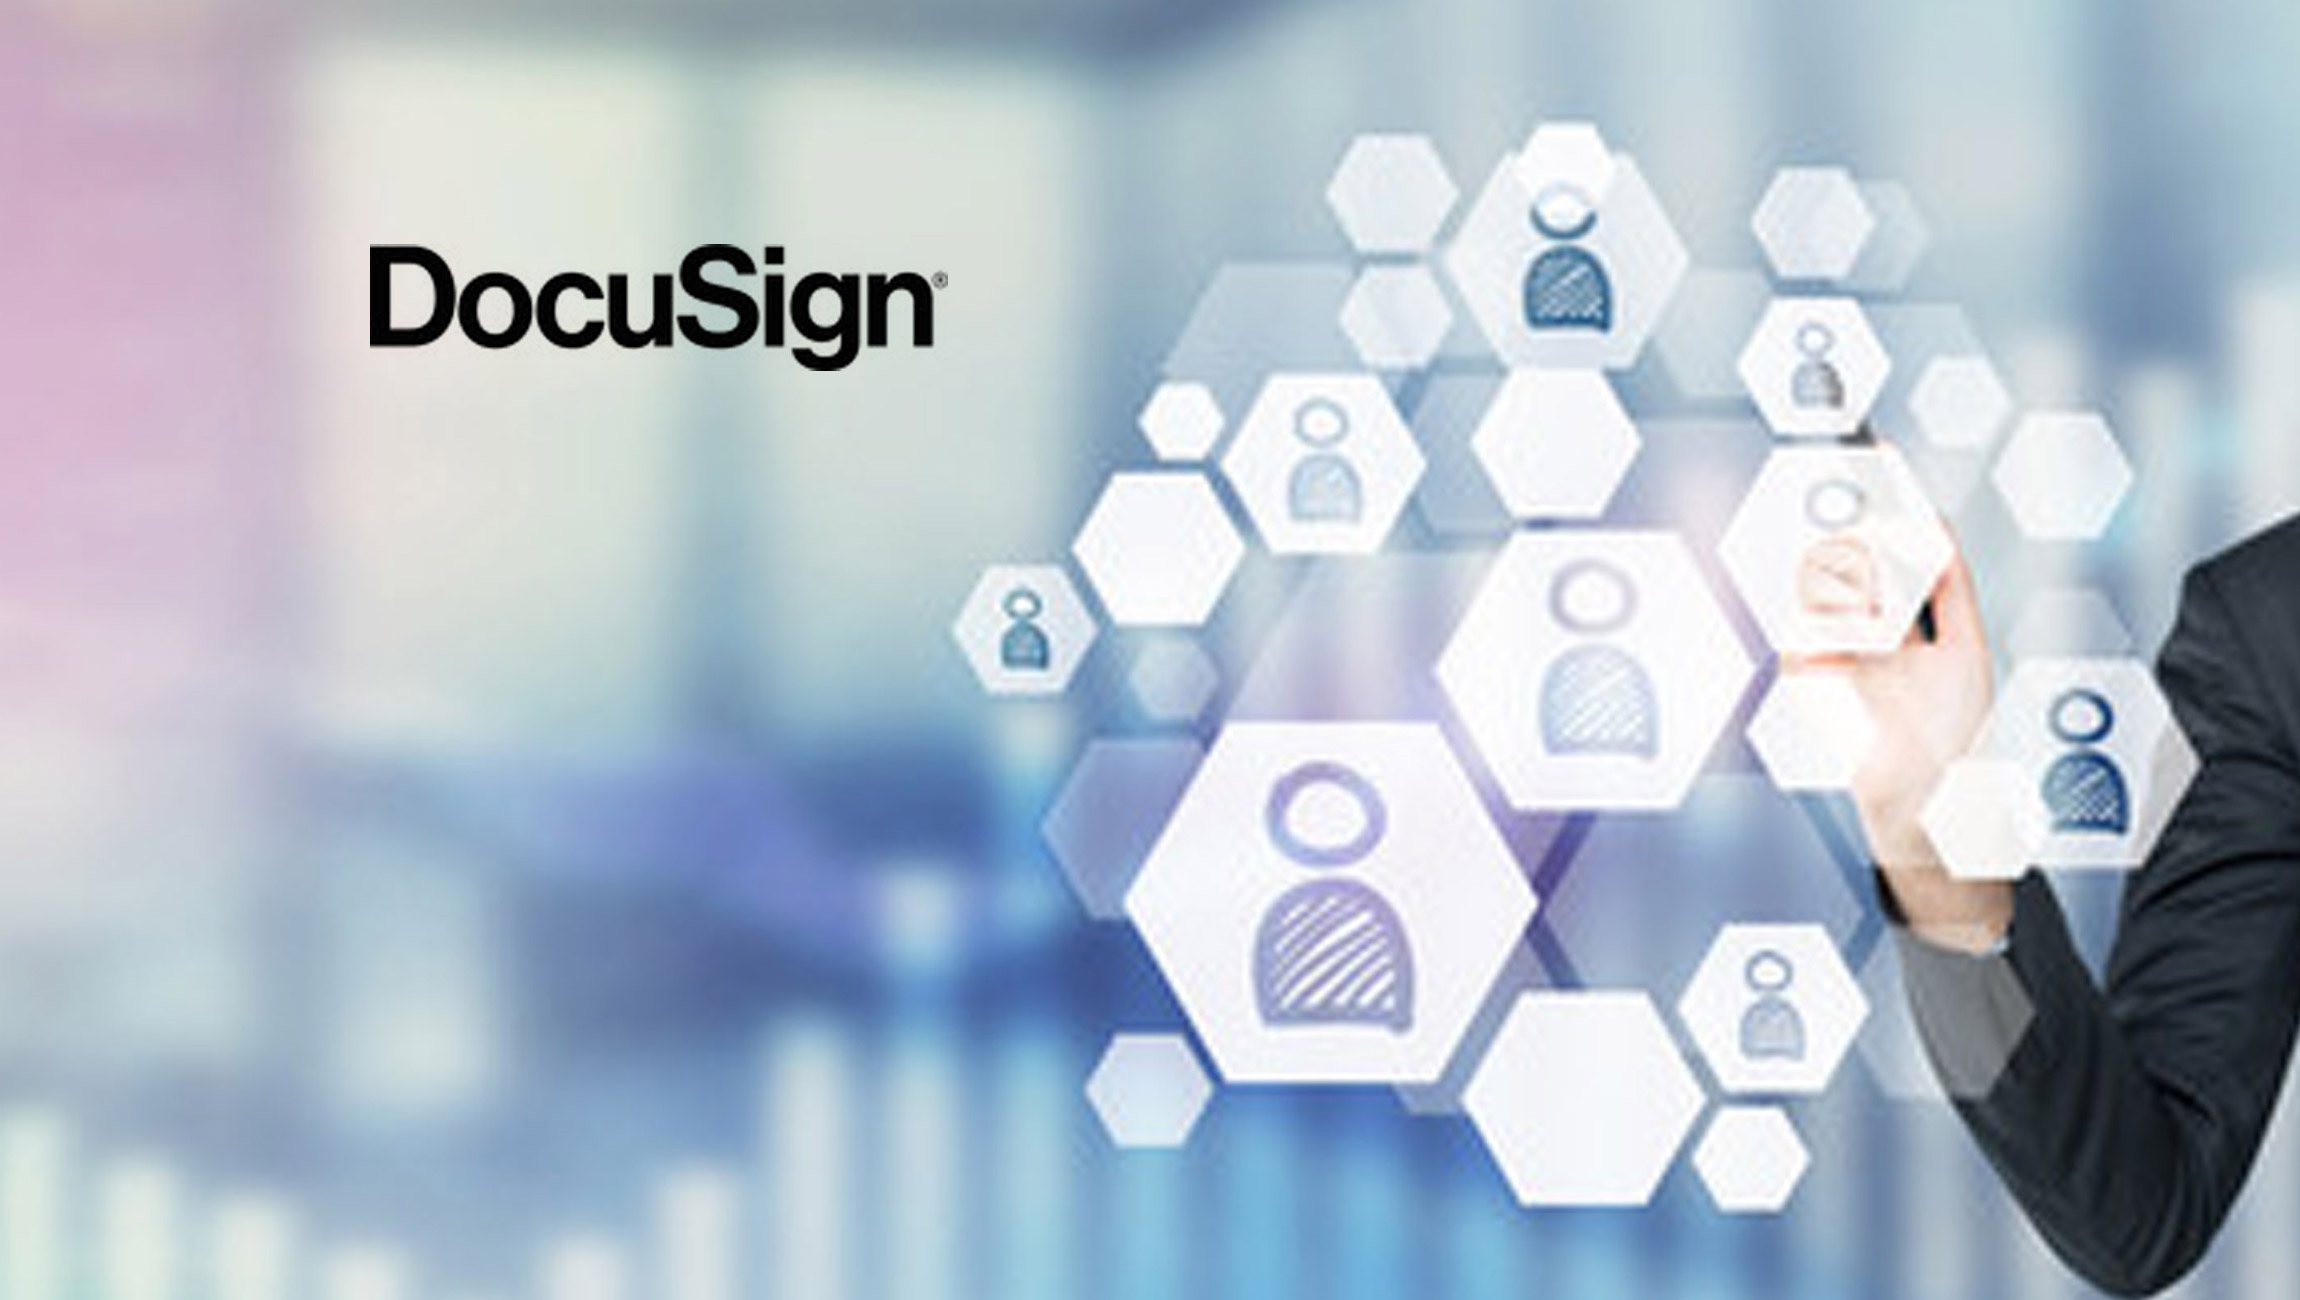 DocuSign Board of Directors Announces Allan Thygesen as new Chief Executive Officer